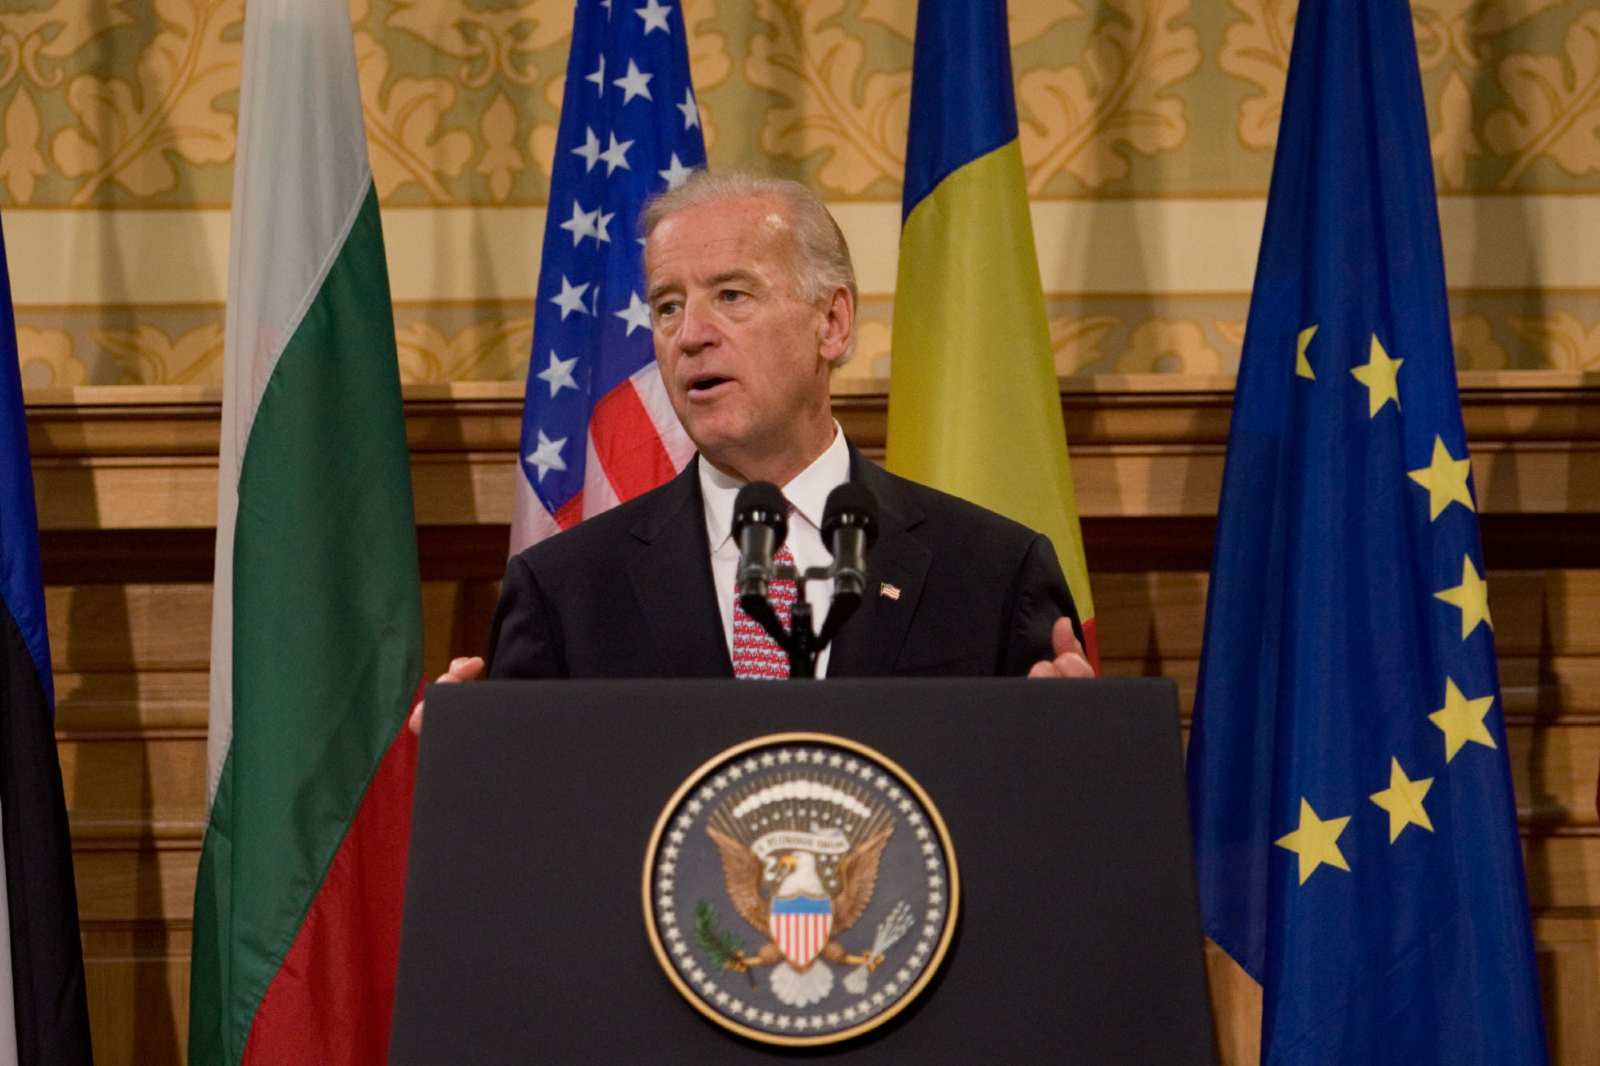 Photo: Vice President Joe Biden speaks at the Central University Library Bucharest, in Bucharest, Romania. October 22, 2009. Credit: Official White House Photo by David Lienemann/Obama White House Archives